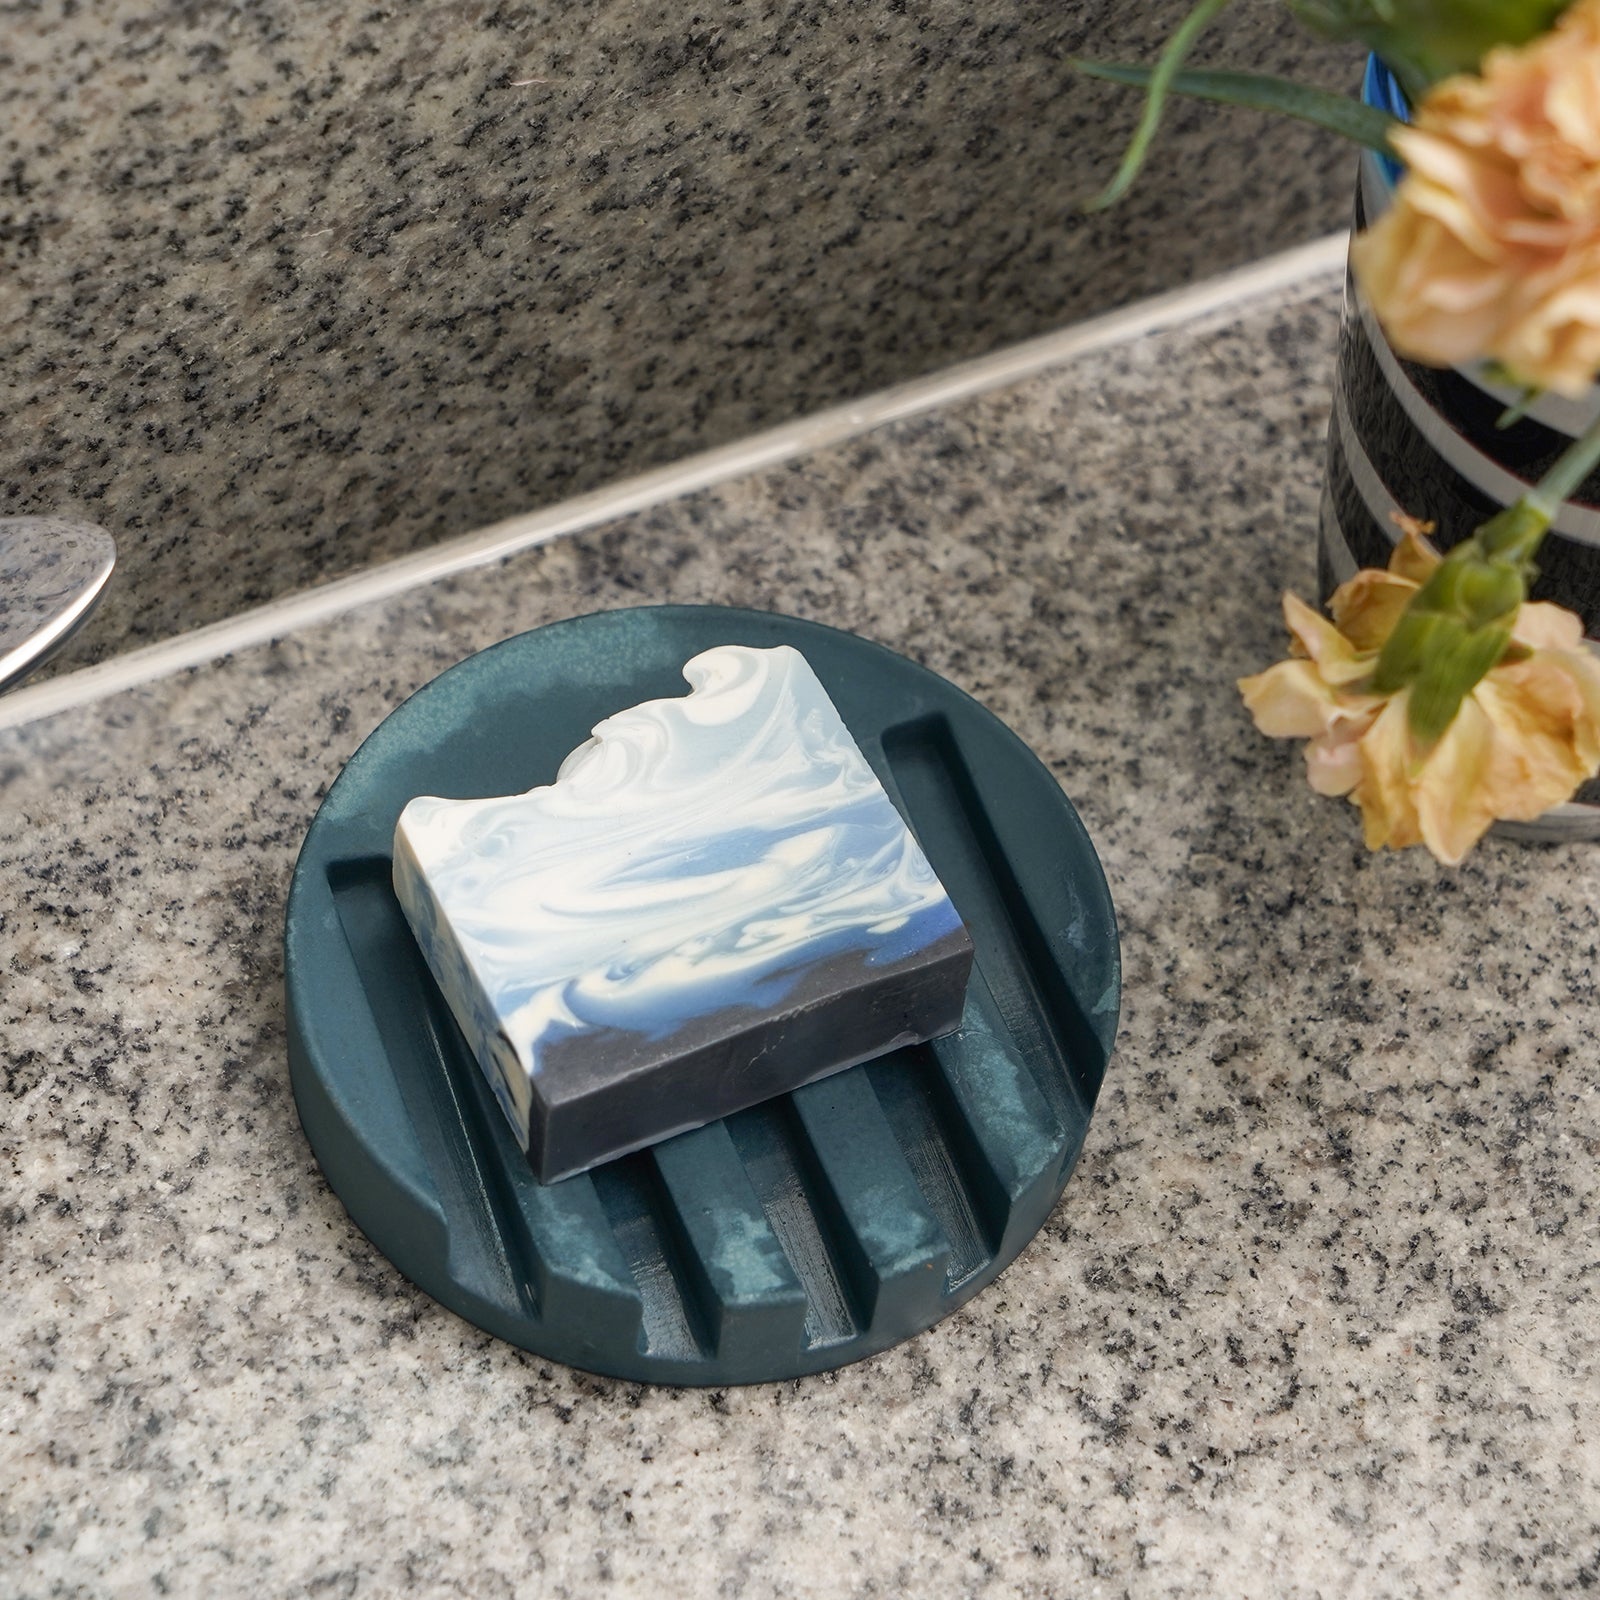 Practical Drain Soap Dish Resin Mold-bar Soap Holder Mold for Shower/ bathroom-self Draining Waterfall Soap Tray Mold-soap Dish Silicone Mold 